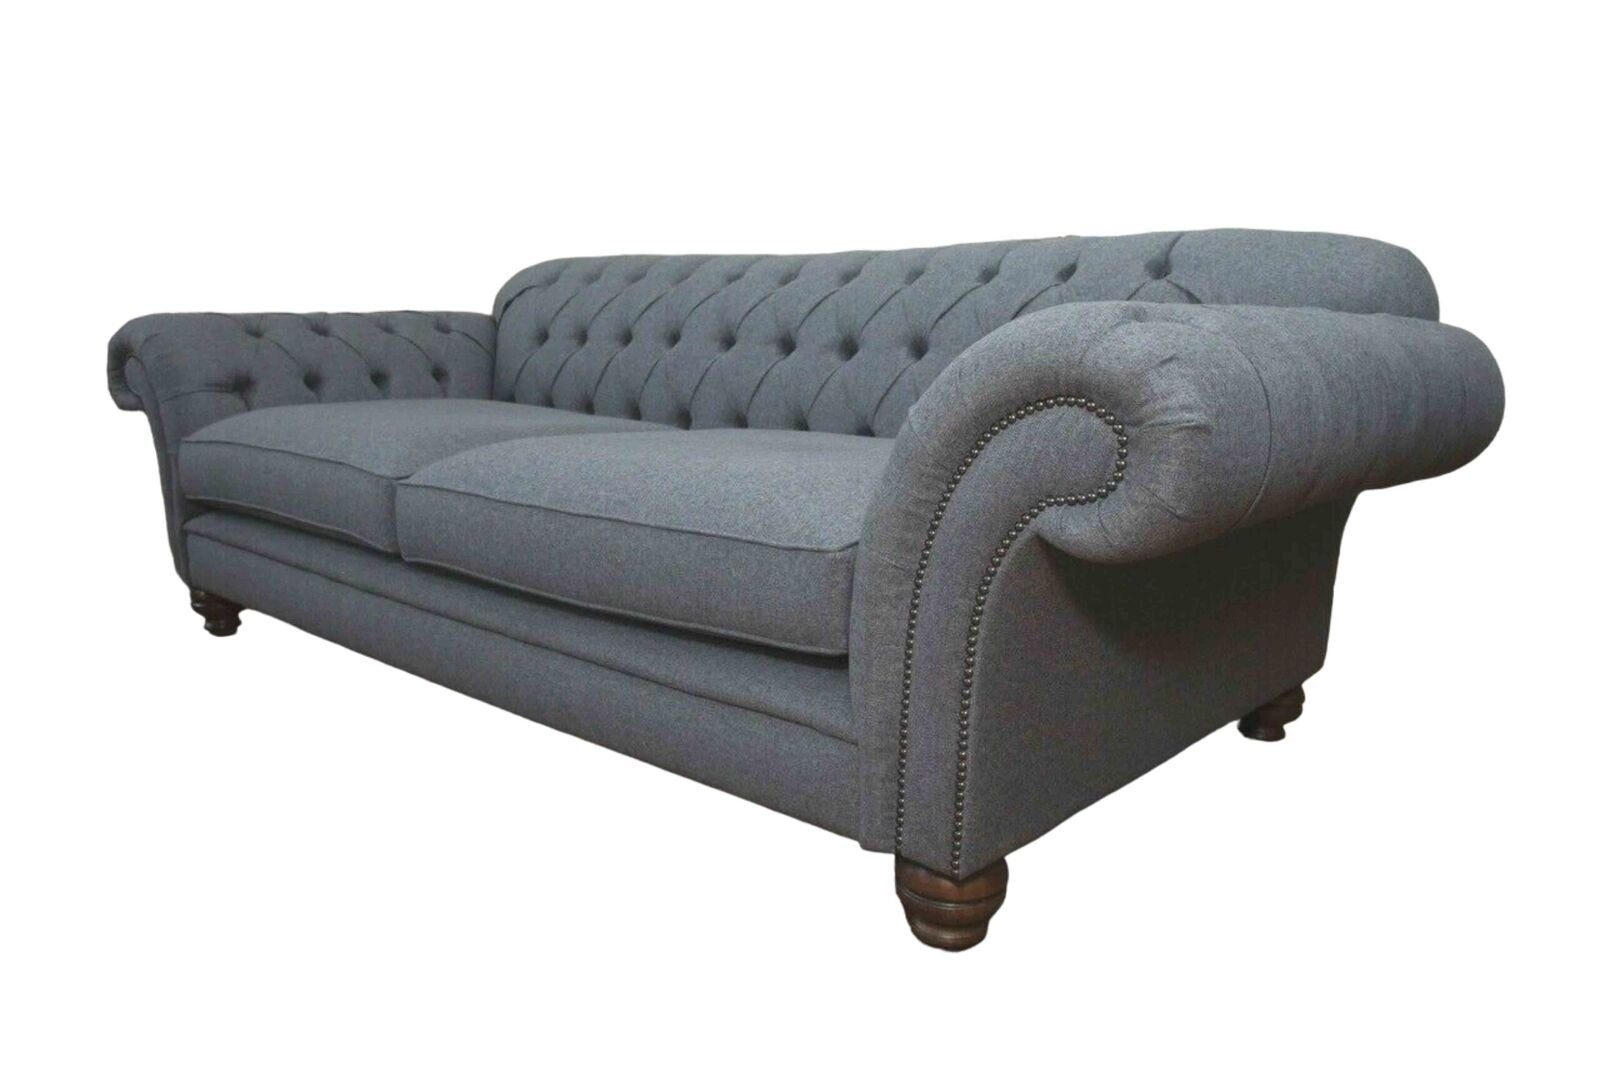 Textil Europe JVmoebel Sofa Made Sofa 4 Graues Grau, Couch Polster Chesterfield Luxus in Sitzer